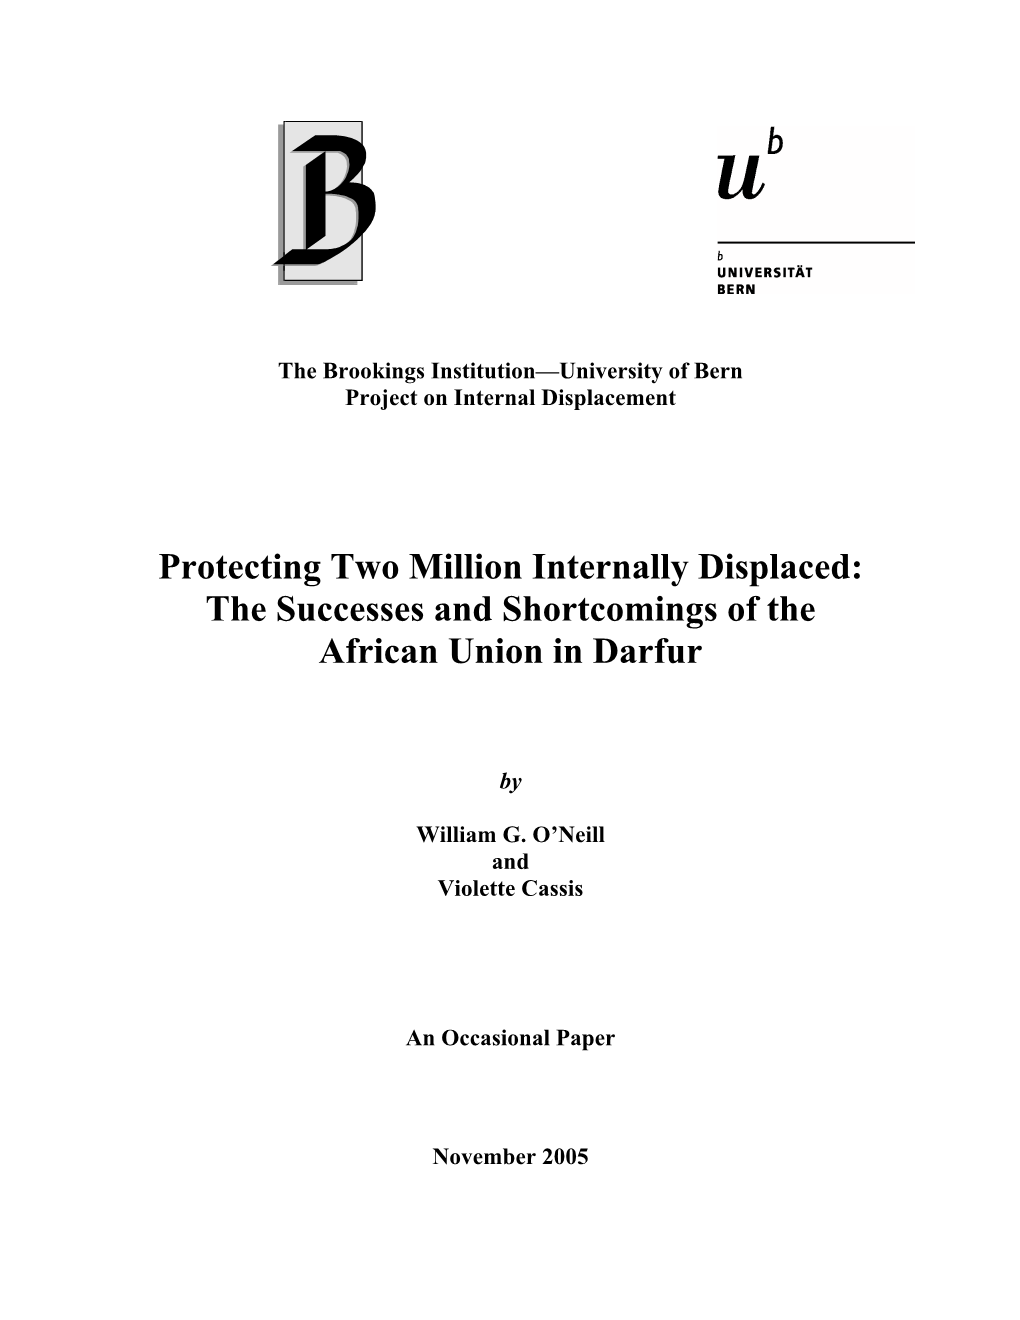 Protecting Two Million Internally Displaced: the Successes and Shortcomings of the African Union in Darfur